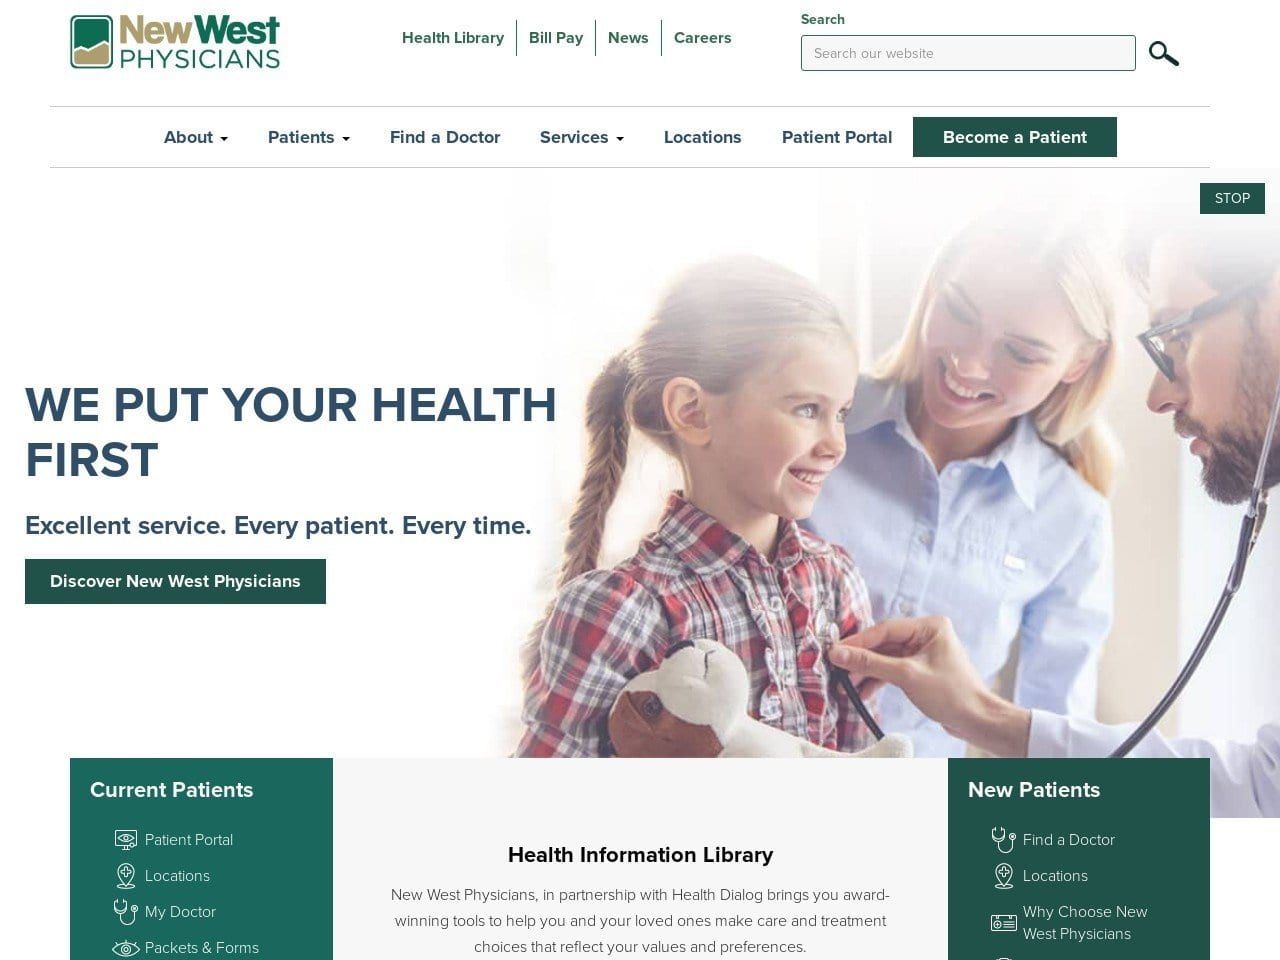 New West Physicians Website Screenshot from nwphysicians.com